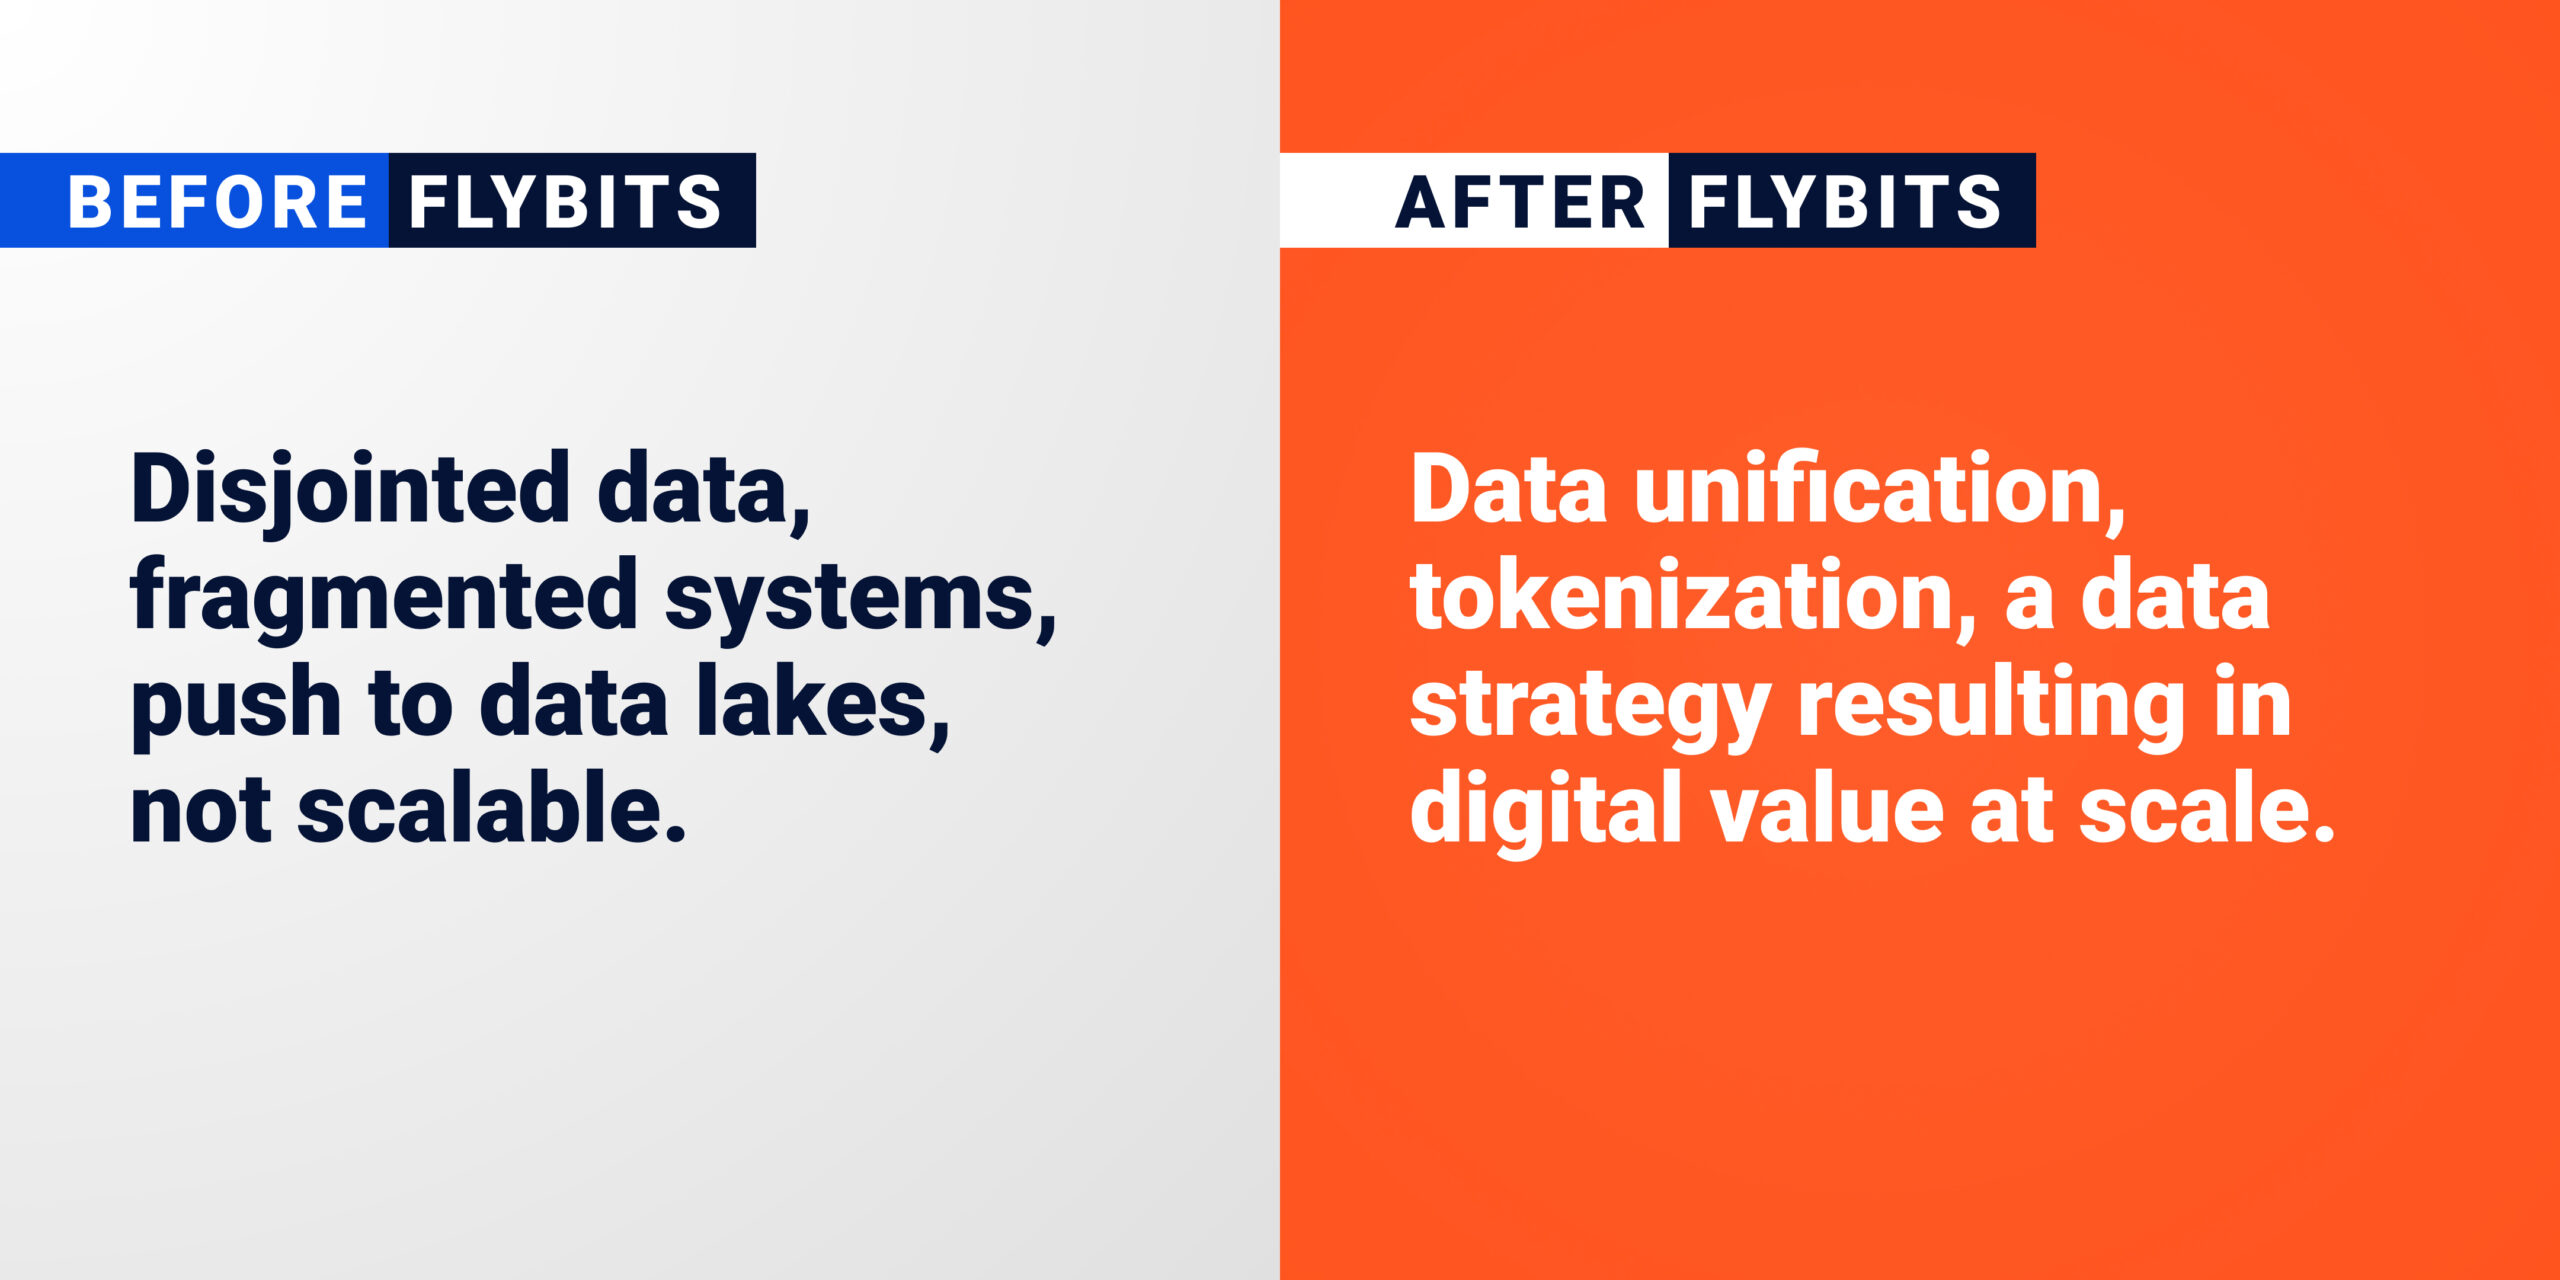 Before Flybits: Disjointed data, fragmented systems, push to data lakes, not scalable. After Flybits: Data unification, tokenization, a data strategy resulting in digital value at scale.